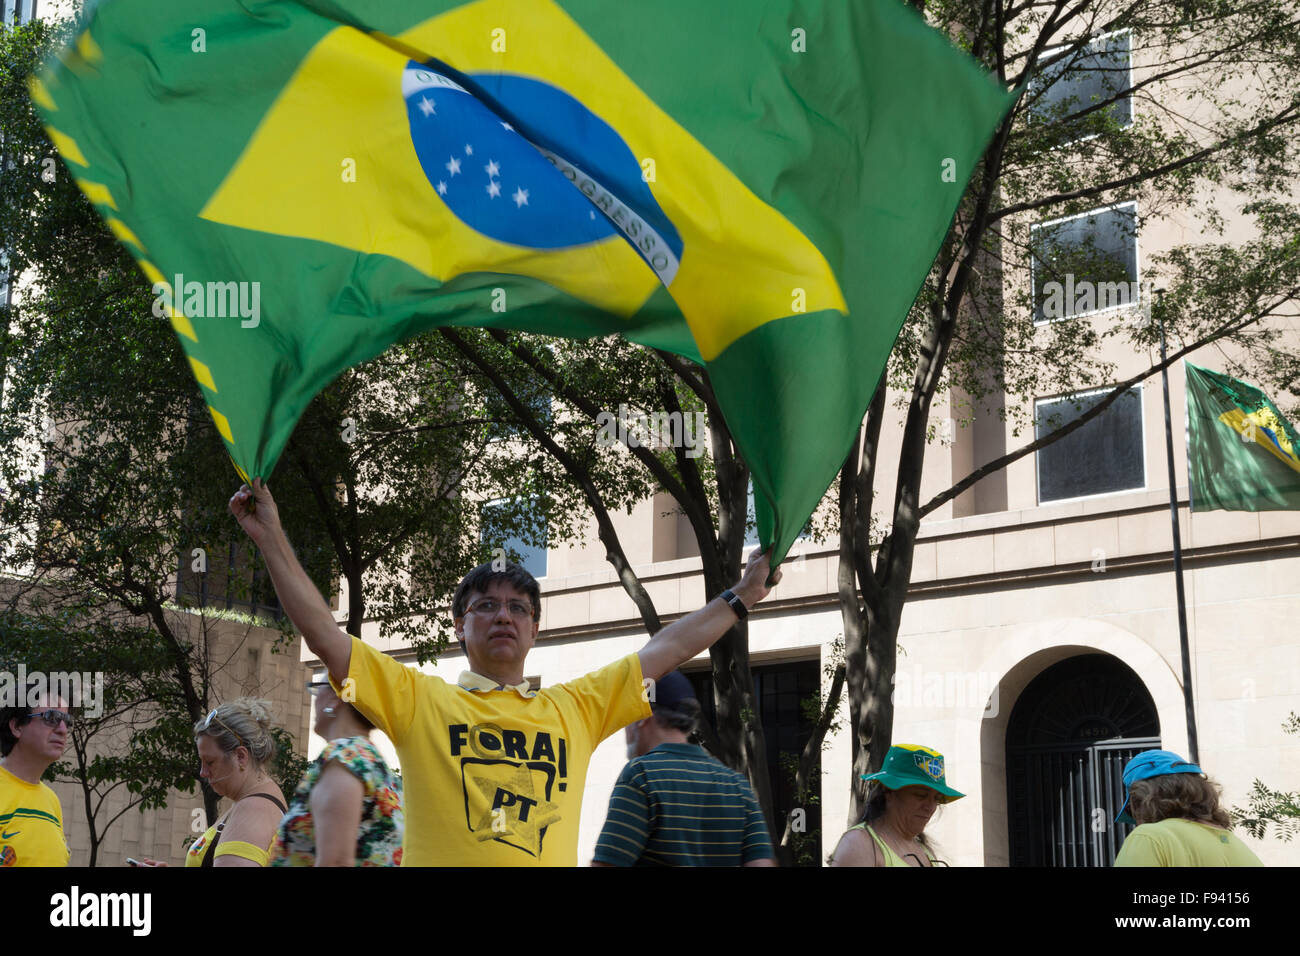 Sao Paulo, Brazil. 13th December, 2015. Demonstrator wearing a t-shirt written in Portuguese 'Fora PT' (in English 'Out PT') waves a Brazil flag during a demonstration calling for the impeachment of Brazil's President Dilma Rousseff in Paulista avenue, Sao Paulo, Brazil. Credit: Andre M. Chang/Alamy Live News Stock Photo